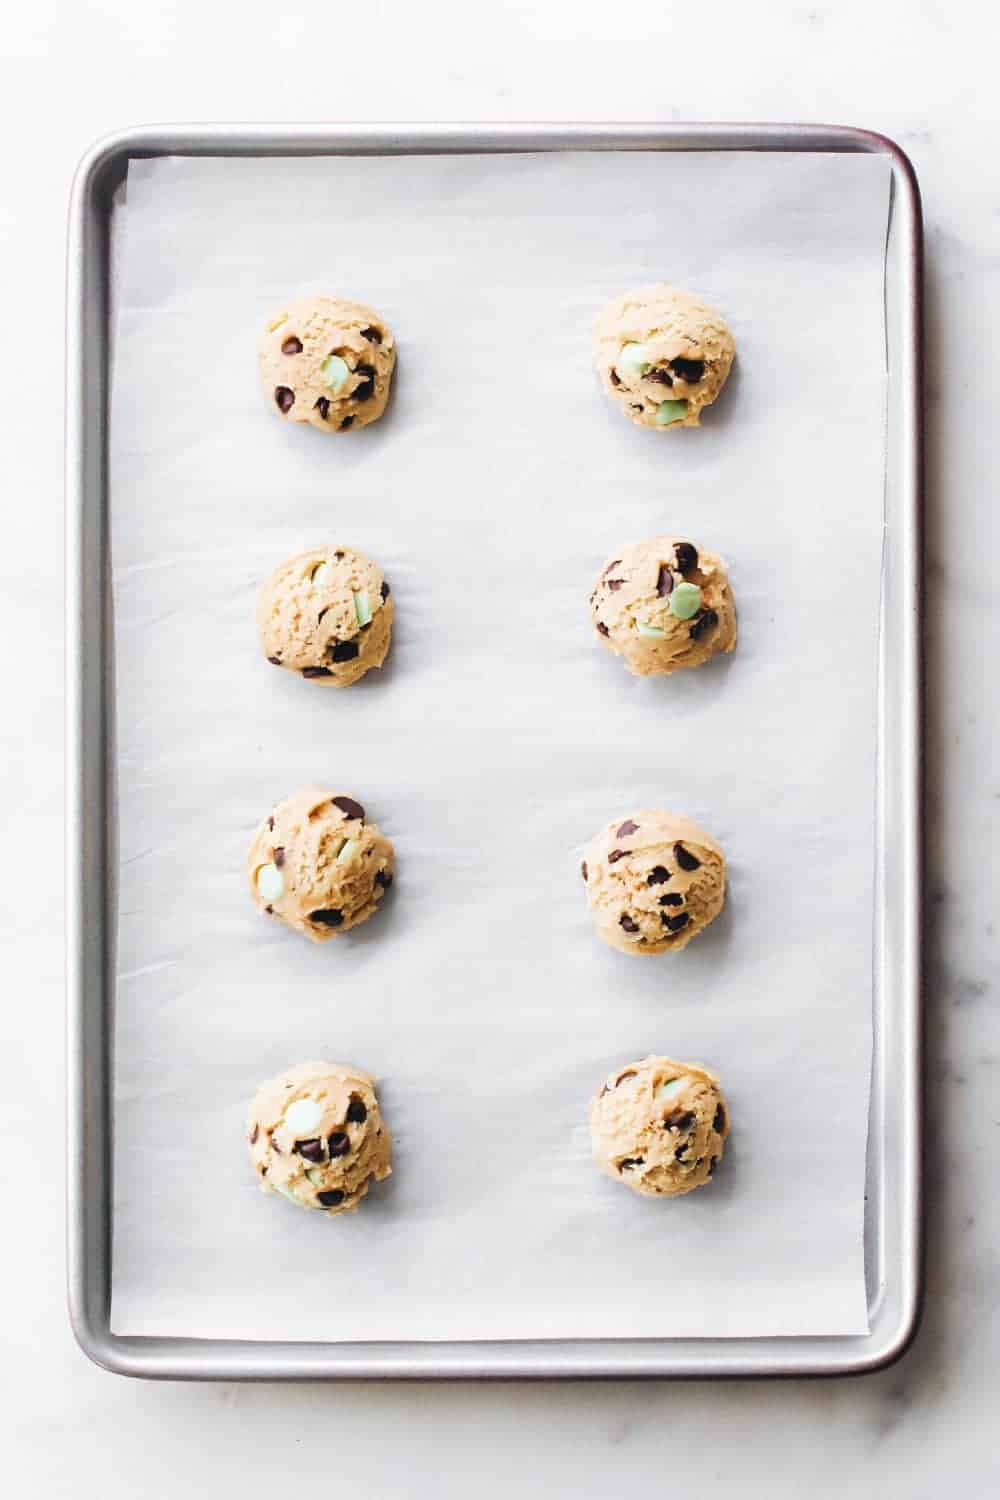 Chewy Mint Chocolate Chip Cookies are the perfect cookie for the holidays. They're simple and totally delicious.